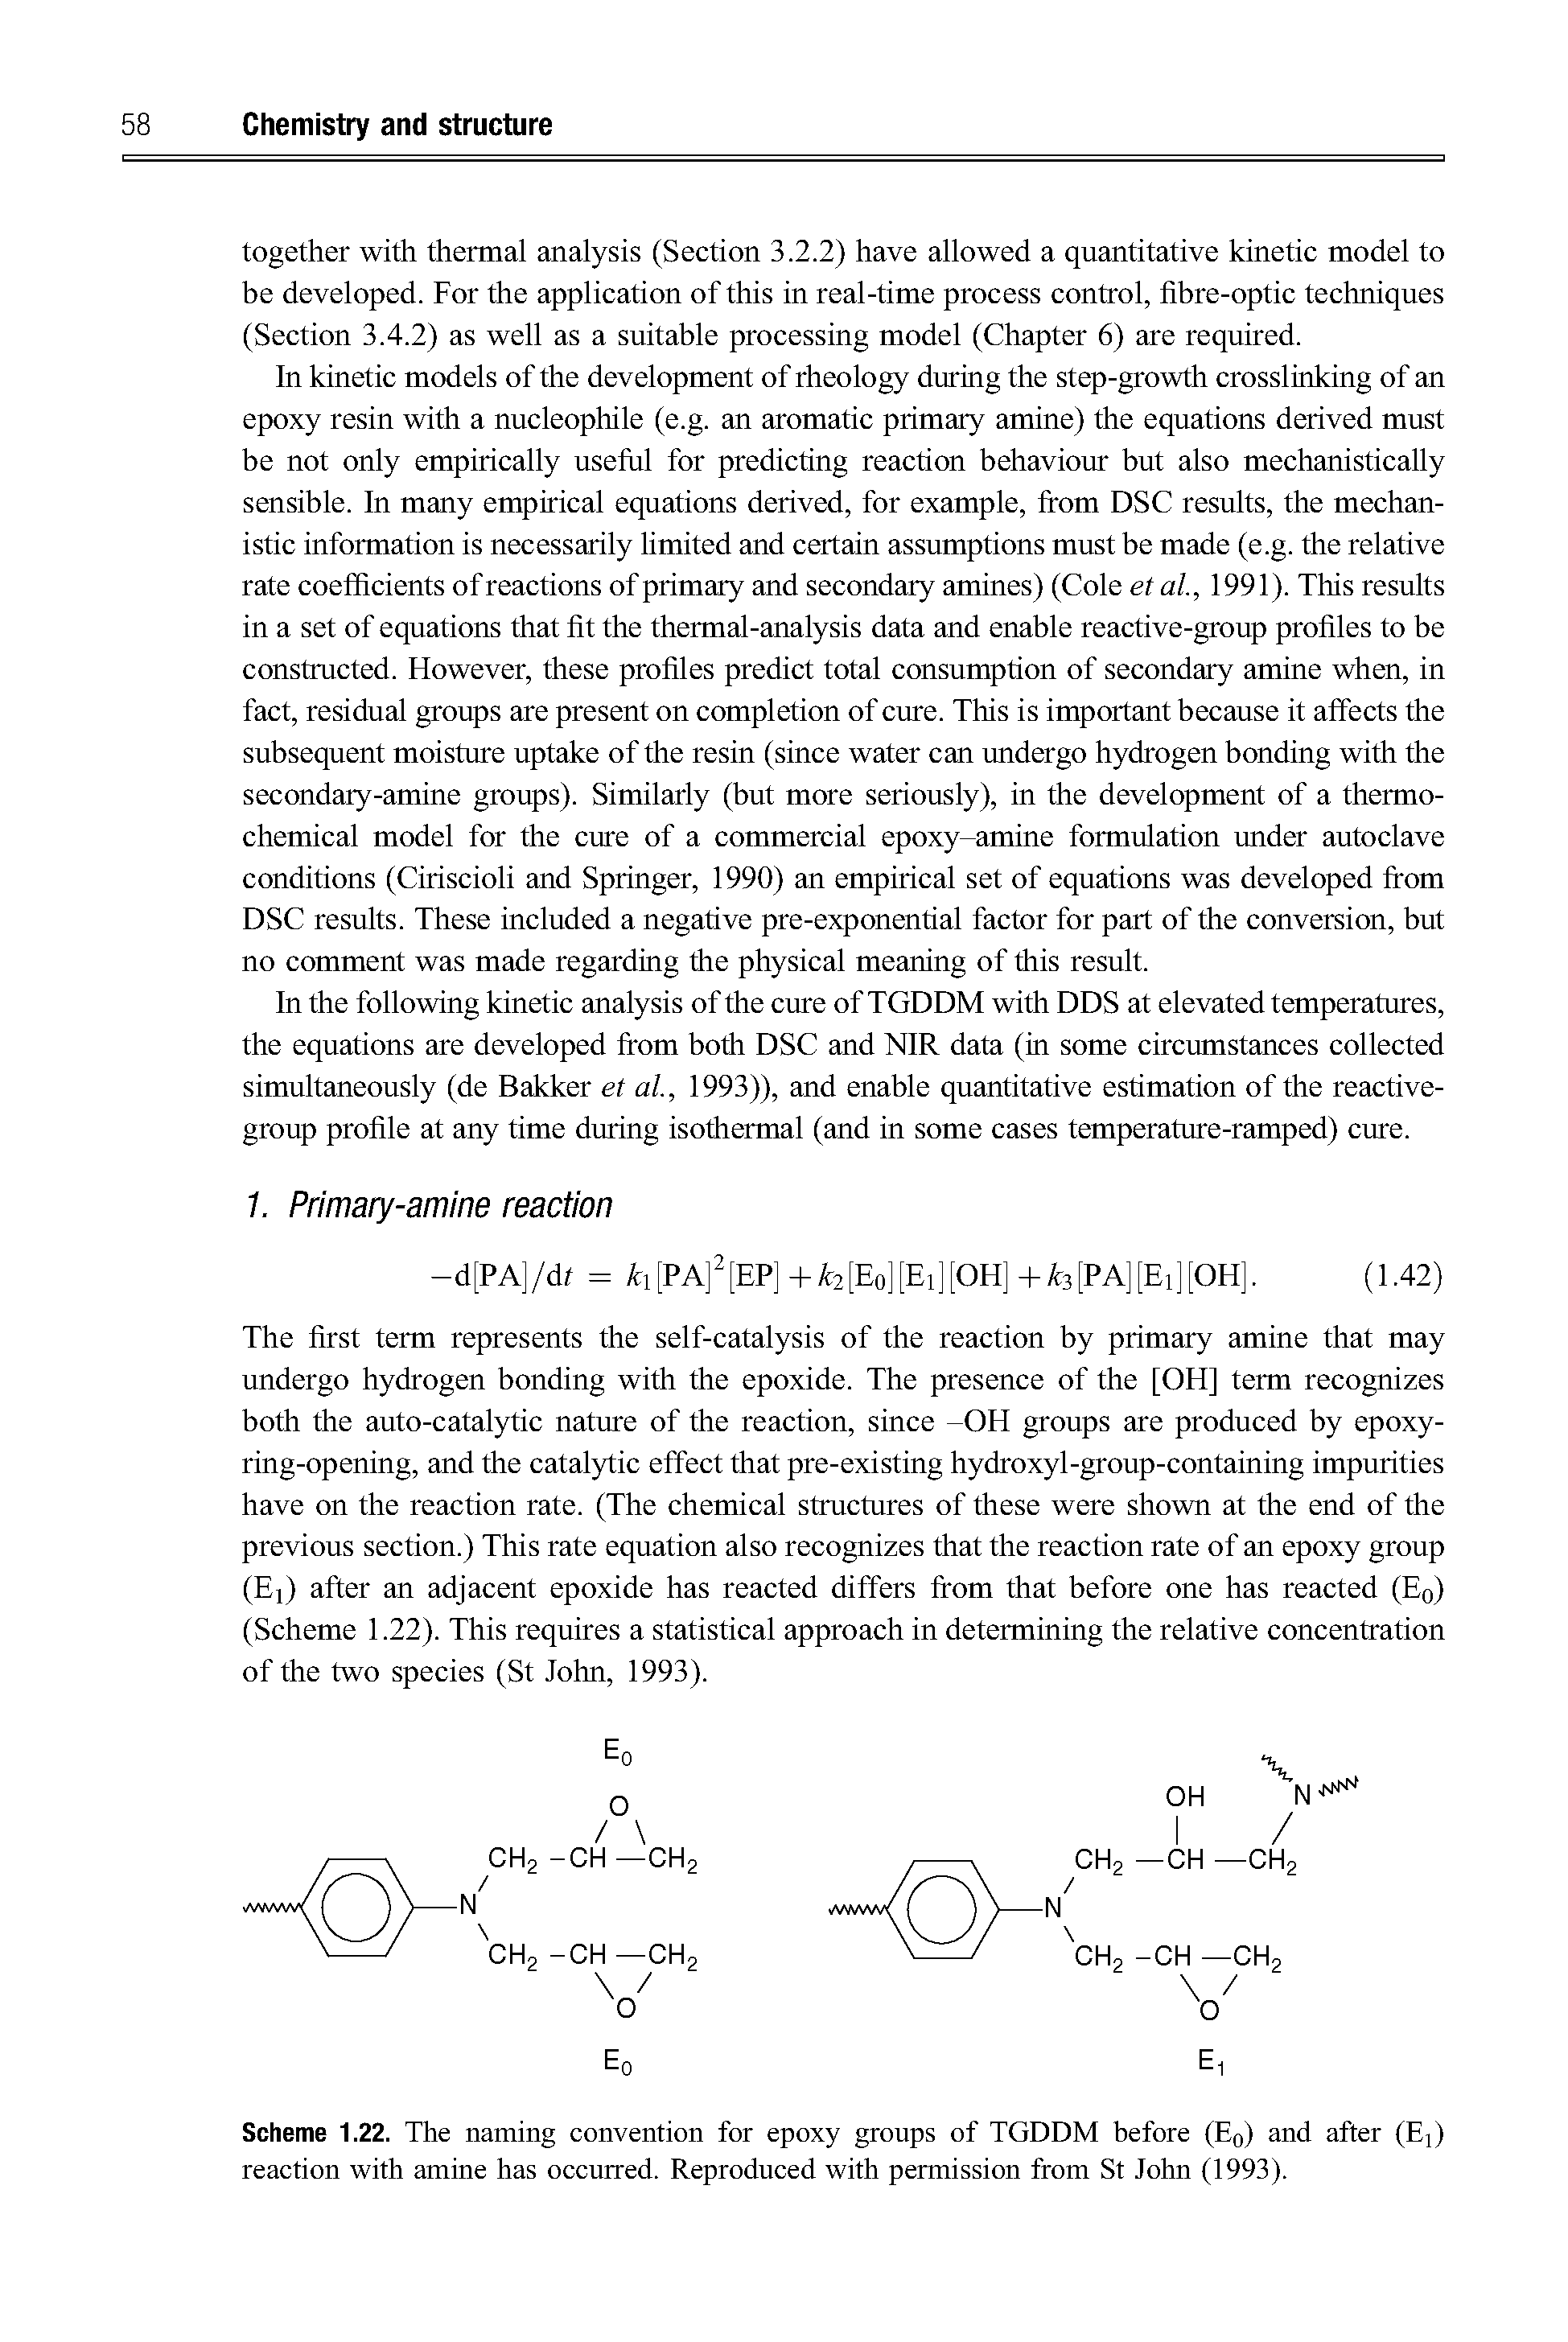 Scheme 1.22. The naming convention for epoxy groups of TGDDM before (Eq) and after (Ei) reaction with amine has occurred. Reproduced with permission from St John (1993).